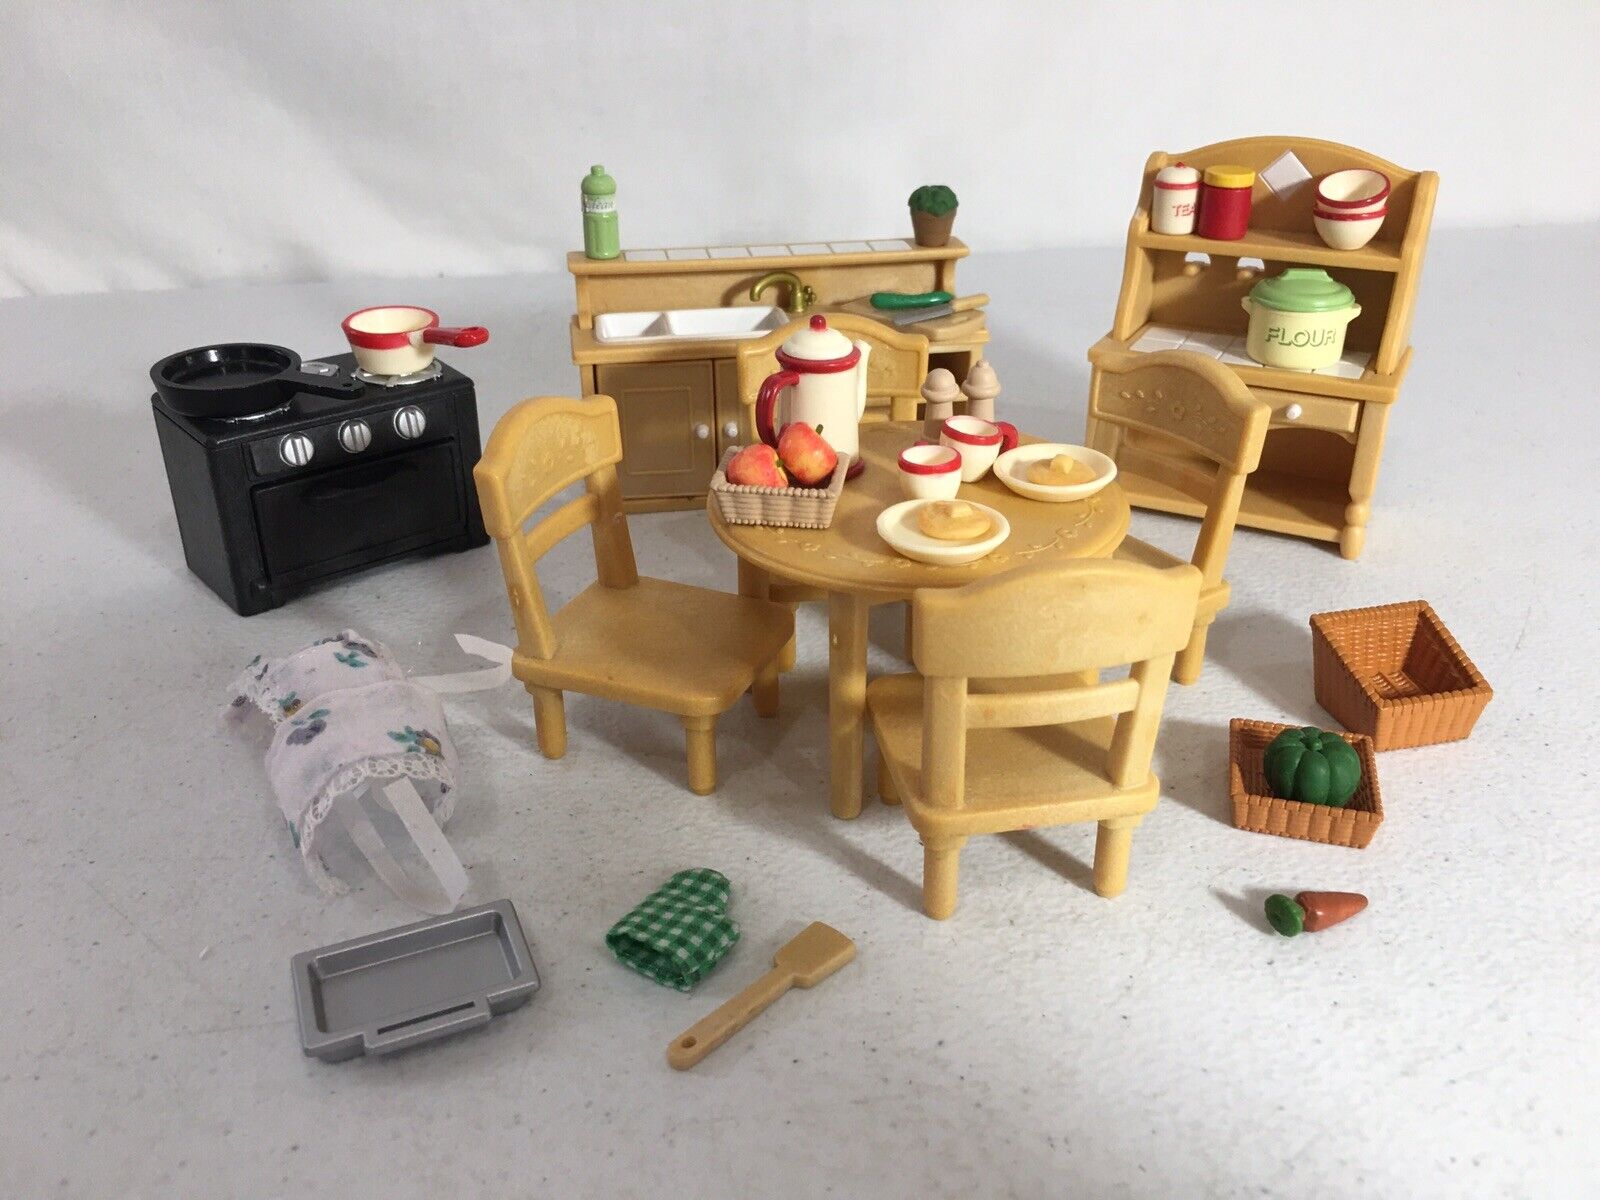 Calico critters/sylvanian families Kitchen Furniture With Access